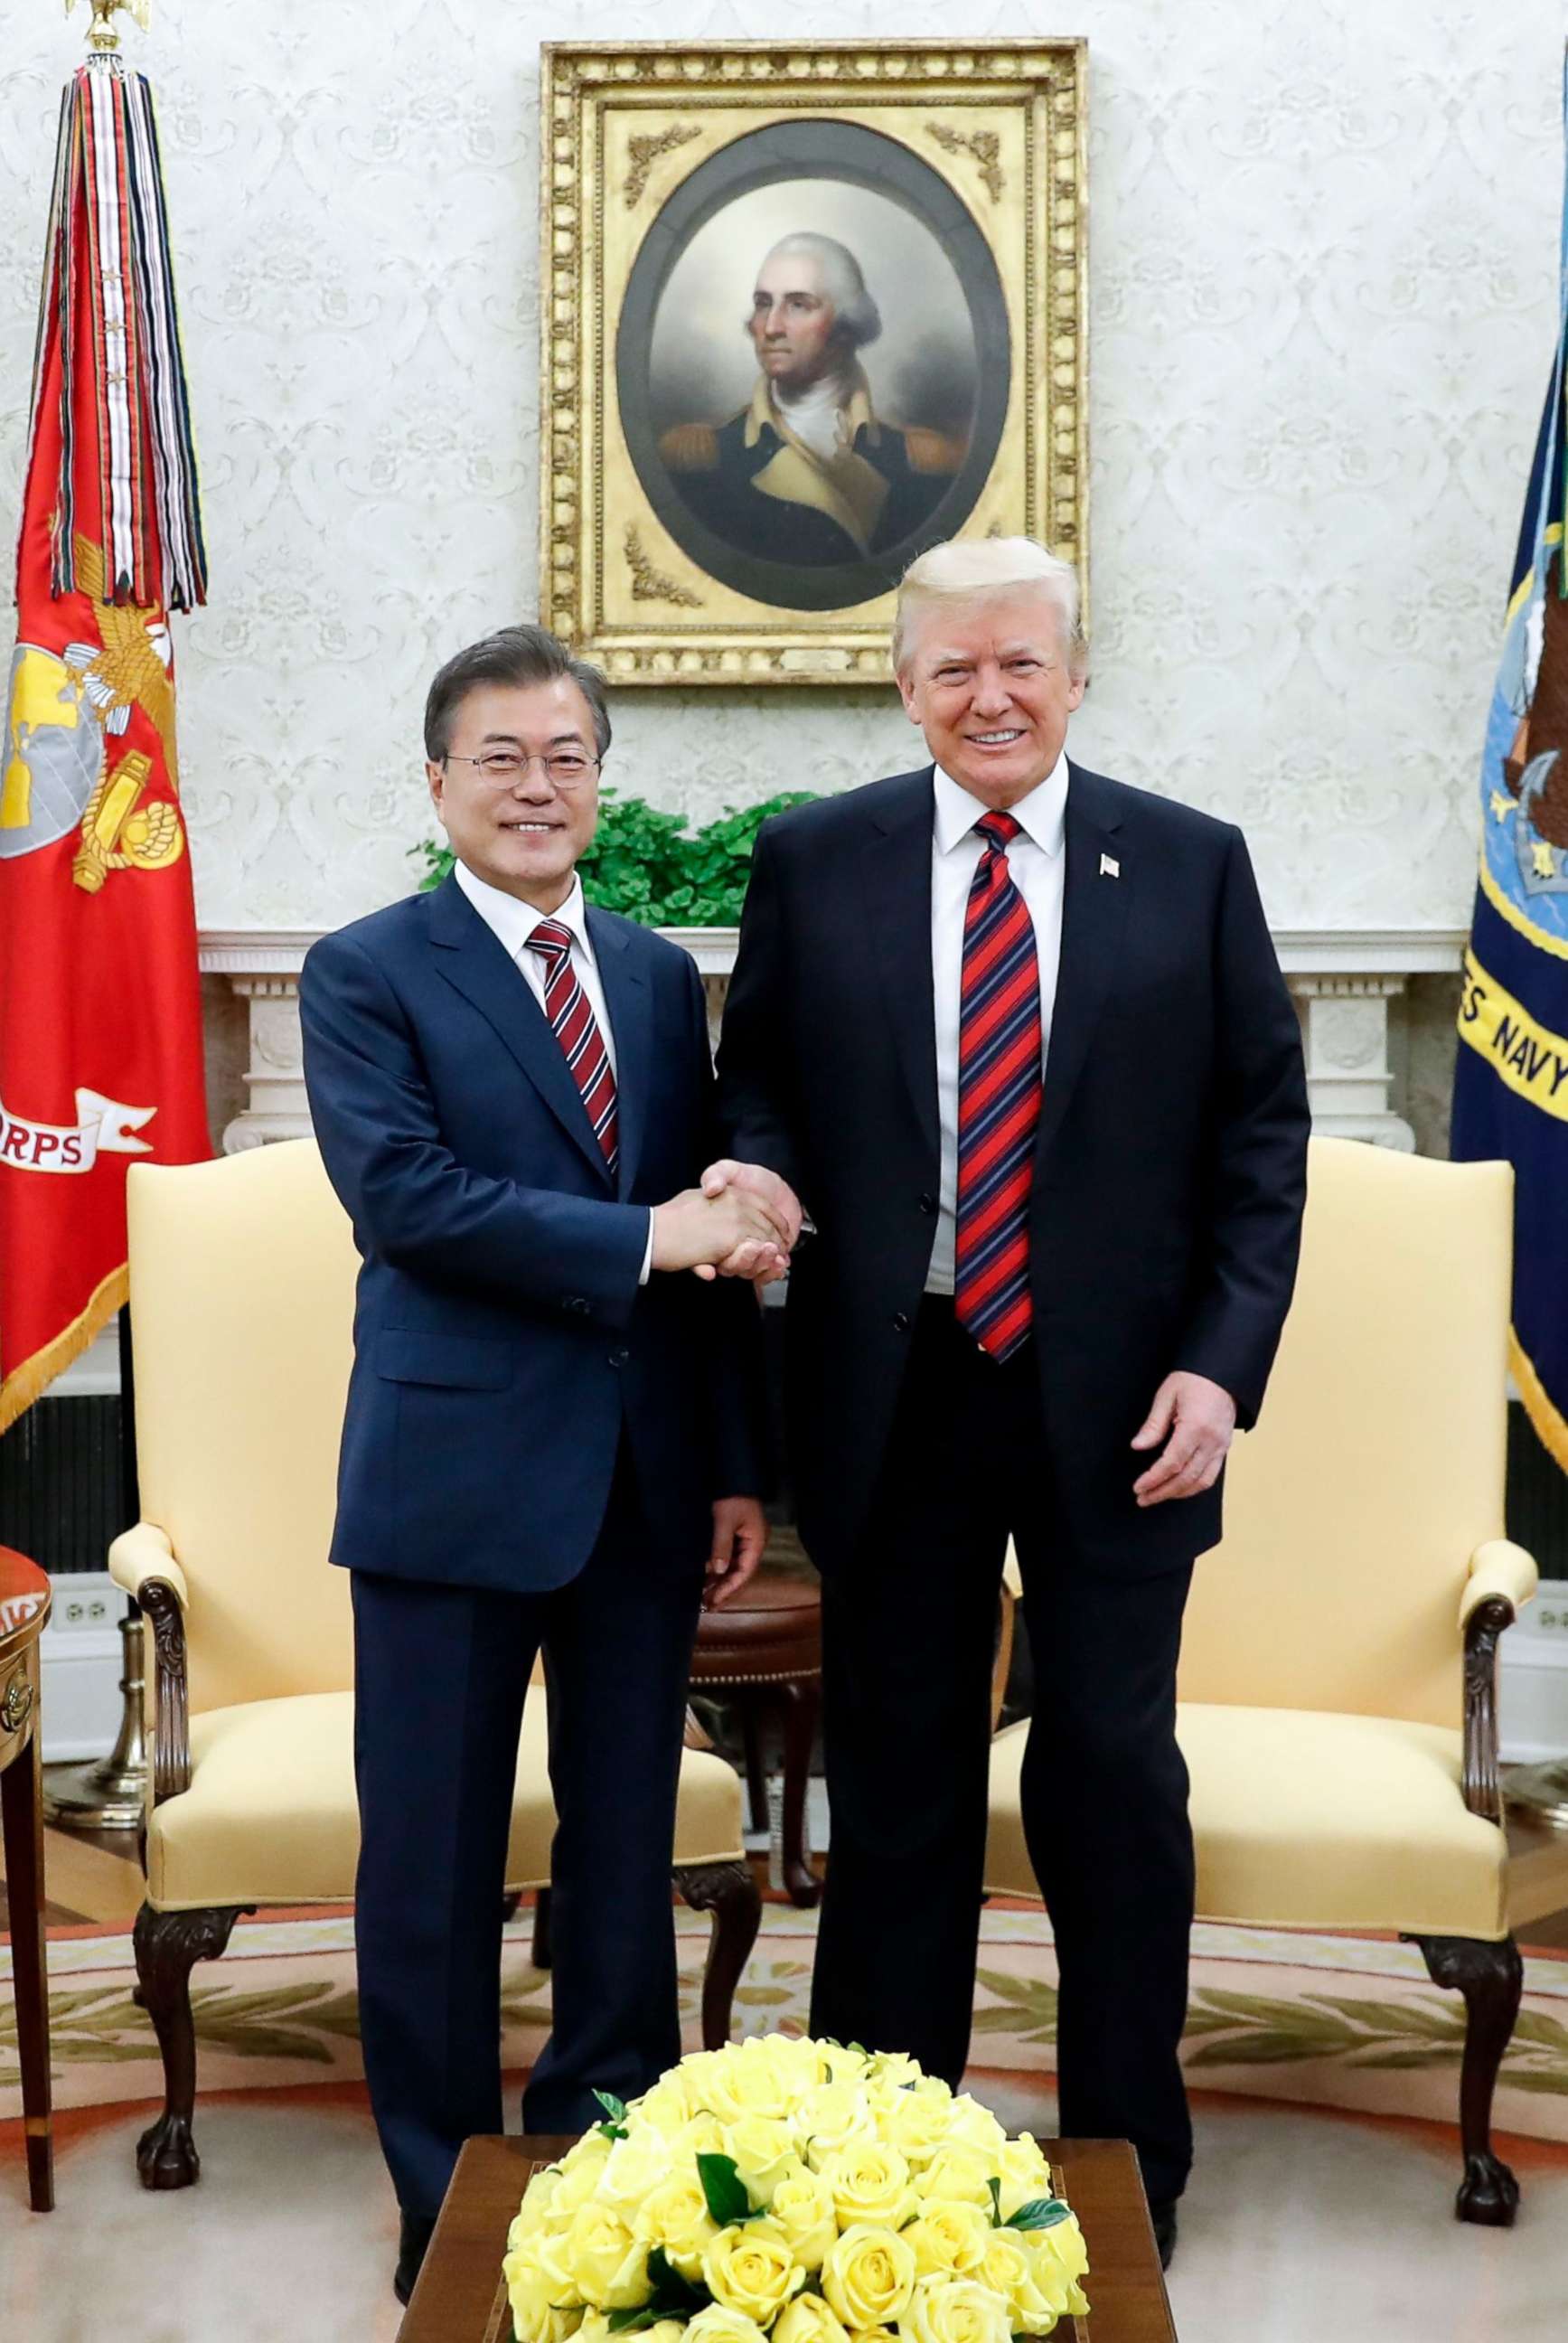 PHOTO: South Korean President Moon Jae-in and President Donald J. Trump shake hands during a meeting at the White House in Washington in this May 22, 2018 file photo.